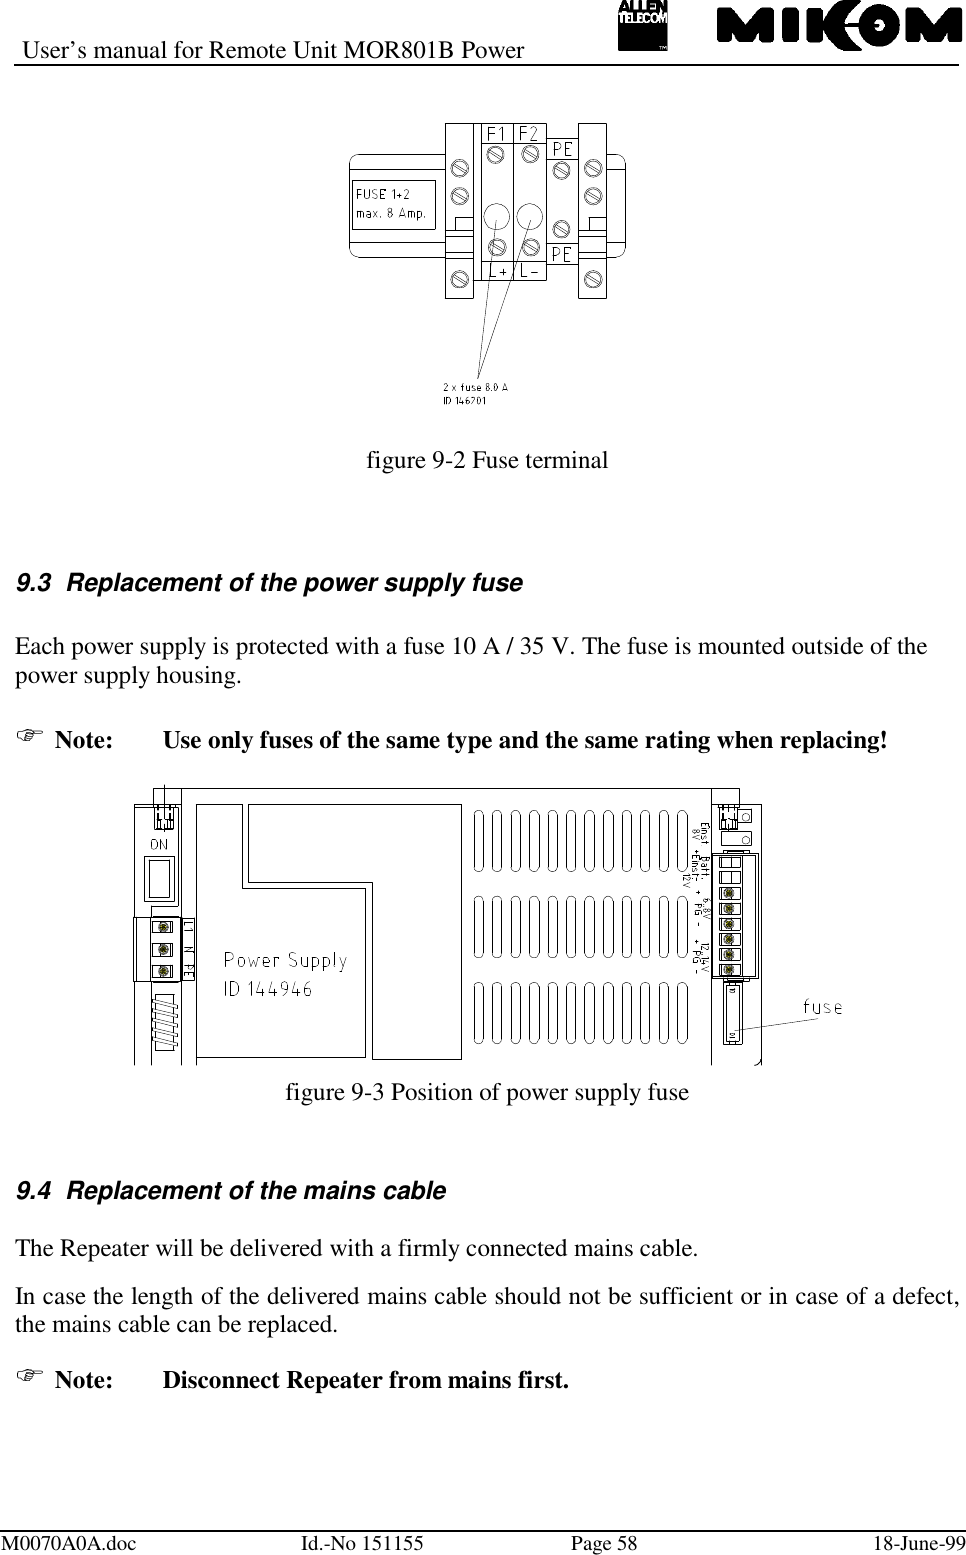 User’s manual for Remote Unit MOR801B PowerM0070A0A.doc Id.-No 151155 Page 58 18-June-99figure 9-2 Fuse terminal9.3  Replacement of the power supply fuseEach power supply is protected with a fuse 10 A / 35 V. The fuse is mounted outside of thepower supply housing. Note:  Use only fuses of the same type and the same rating when replacing!figure 9-3 Position of power supply fuse9.4  Replacement of the mains cableThe Repeater will be delivered with a firmly connected mains cable.In case the length of the delivered mains cable should not be sufficient or in case of a defect,the mains cable can be replaced. Note: Disconnect Repeater from mains first.